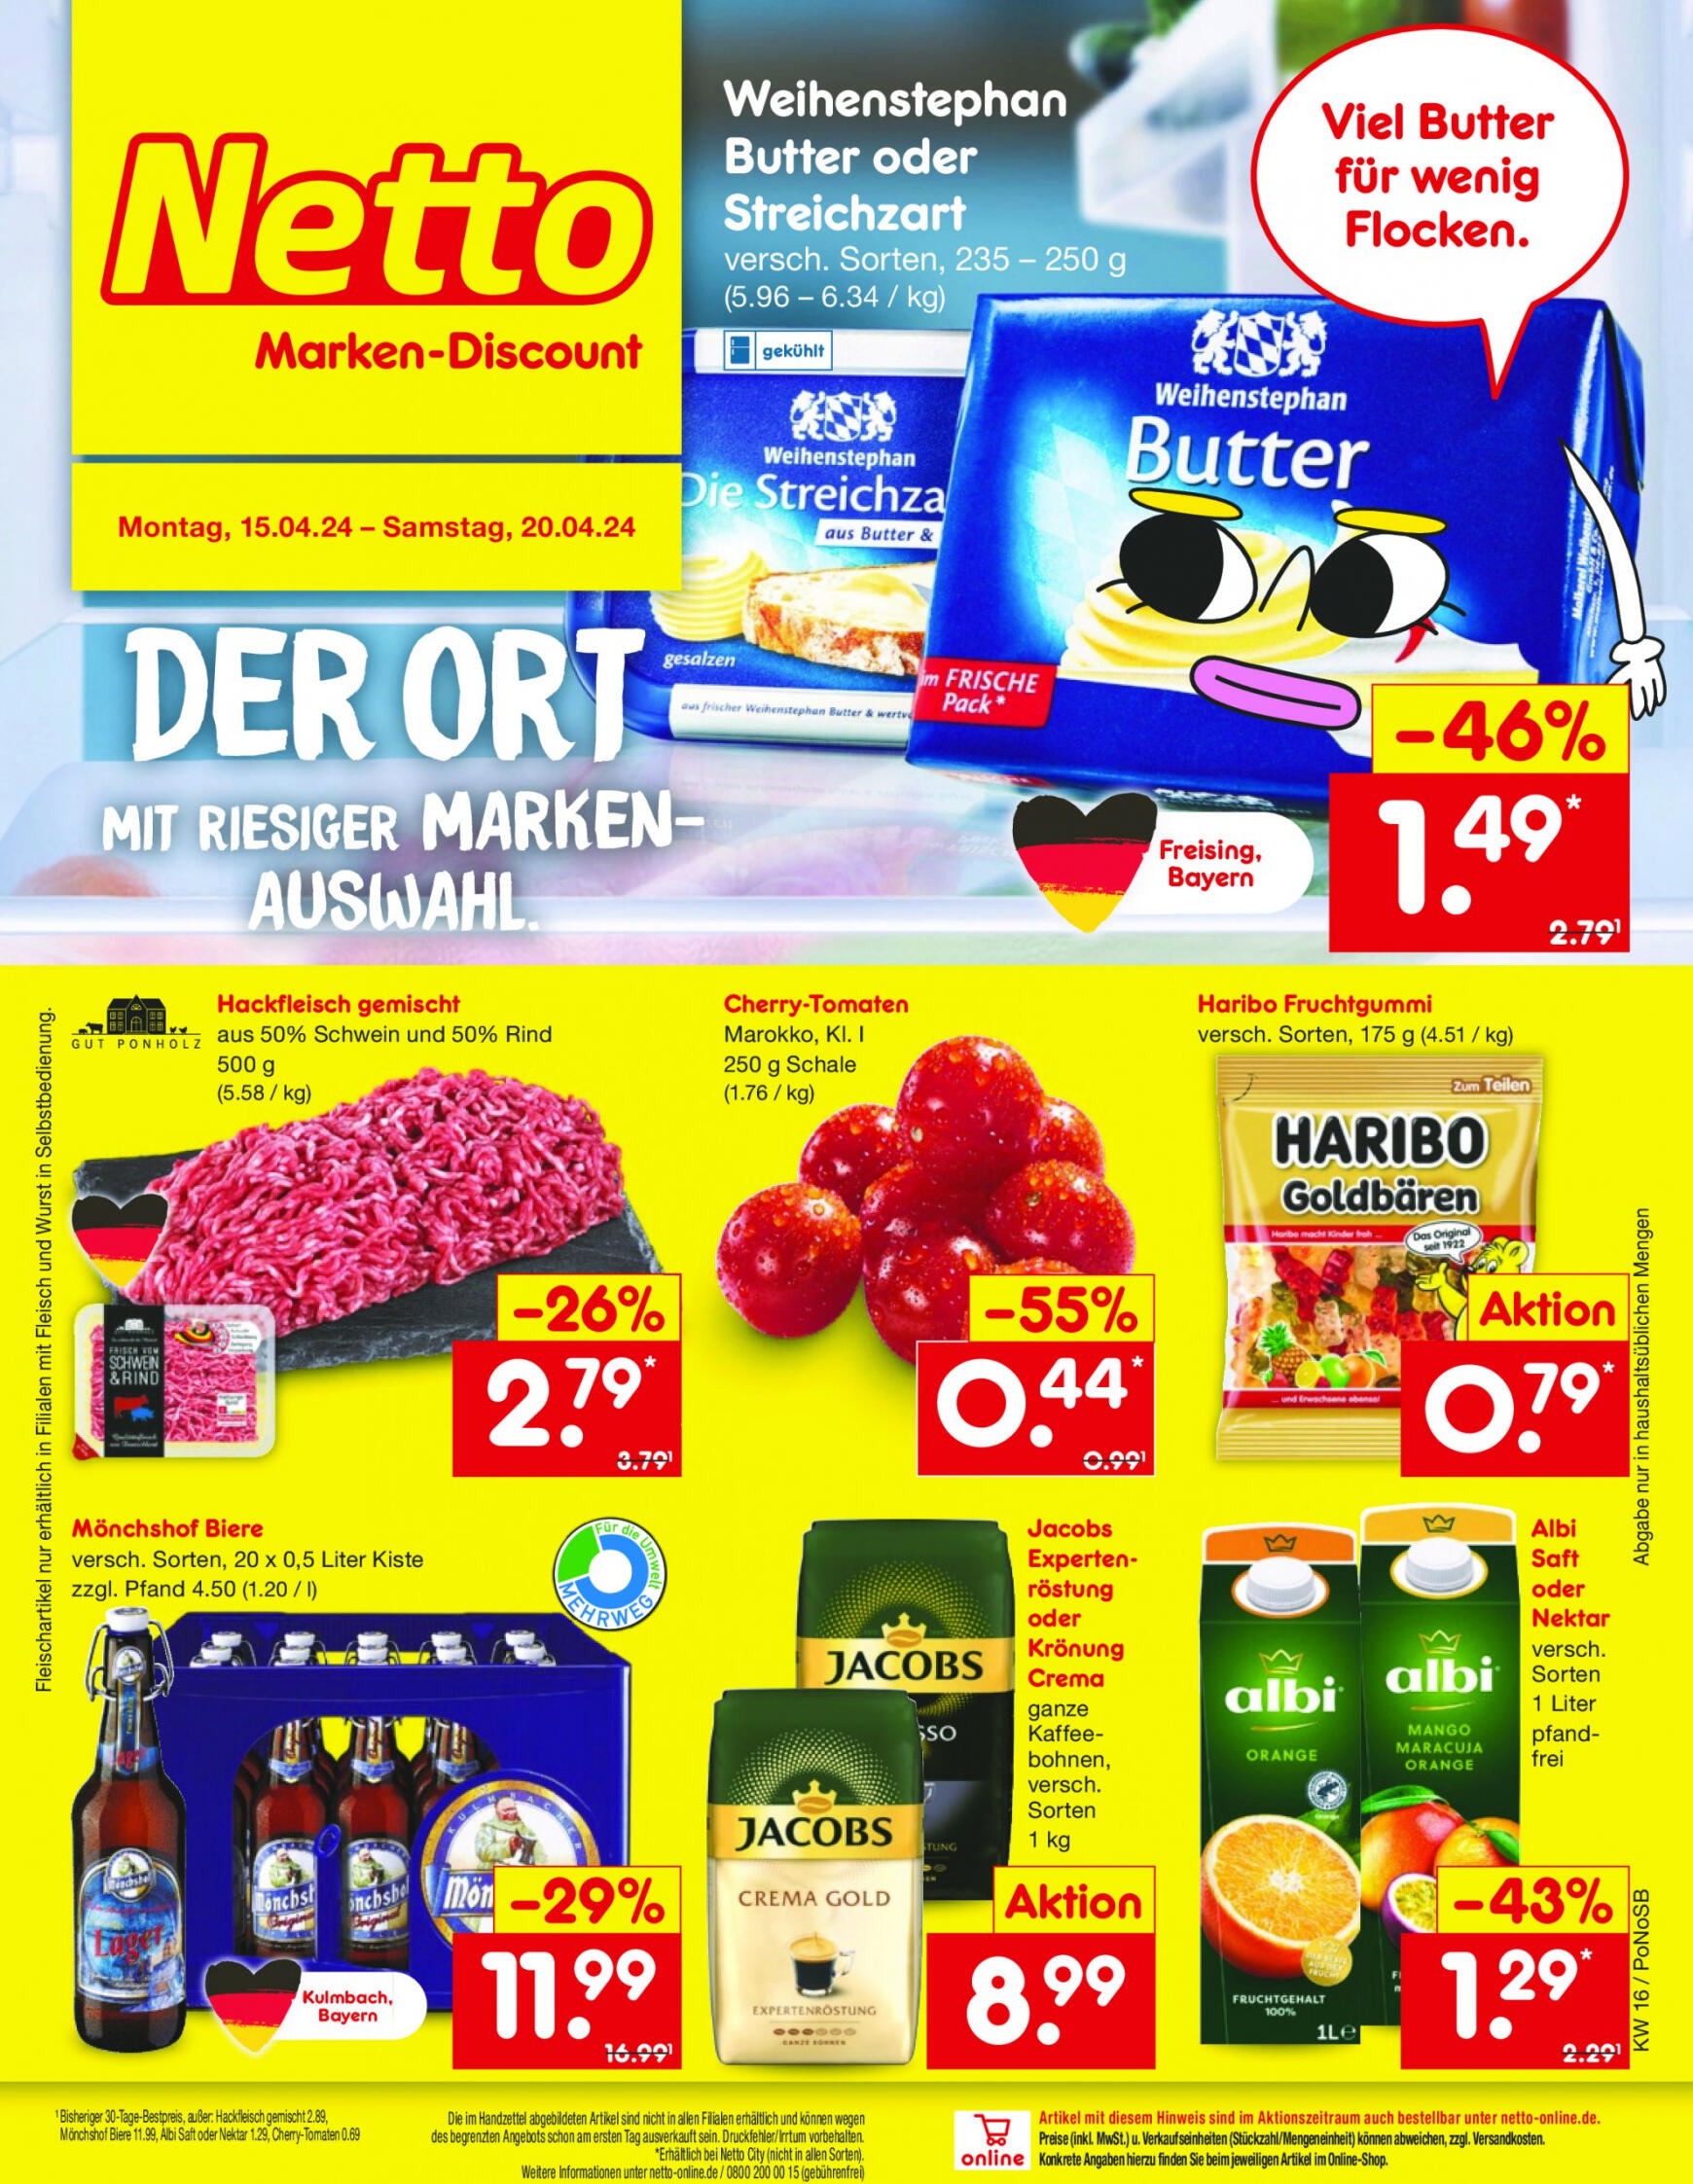 netto - Flyer Netto aktuell 15.04. - 20.04. - page: 1